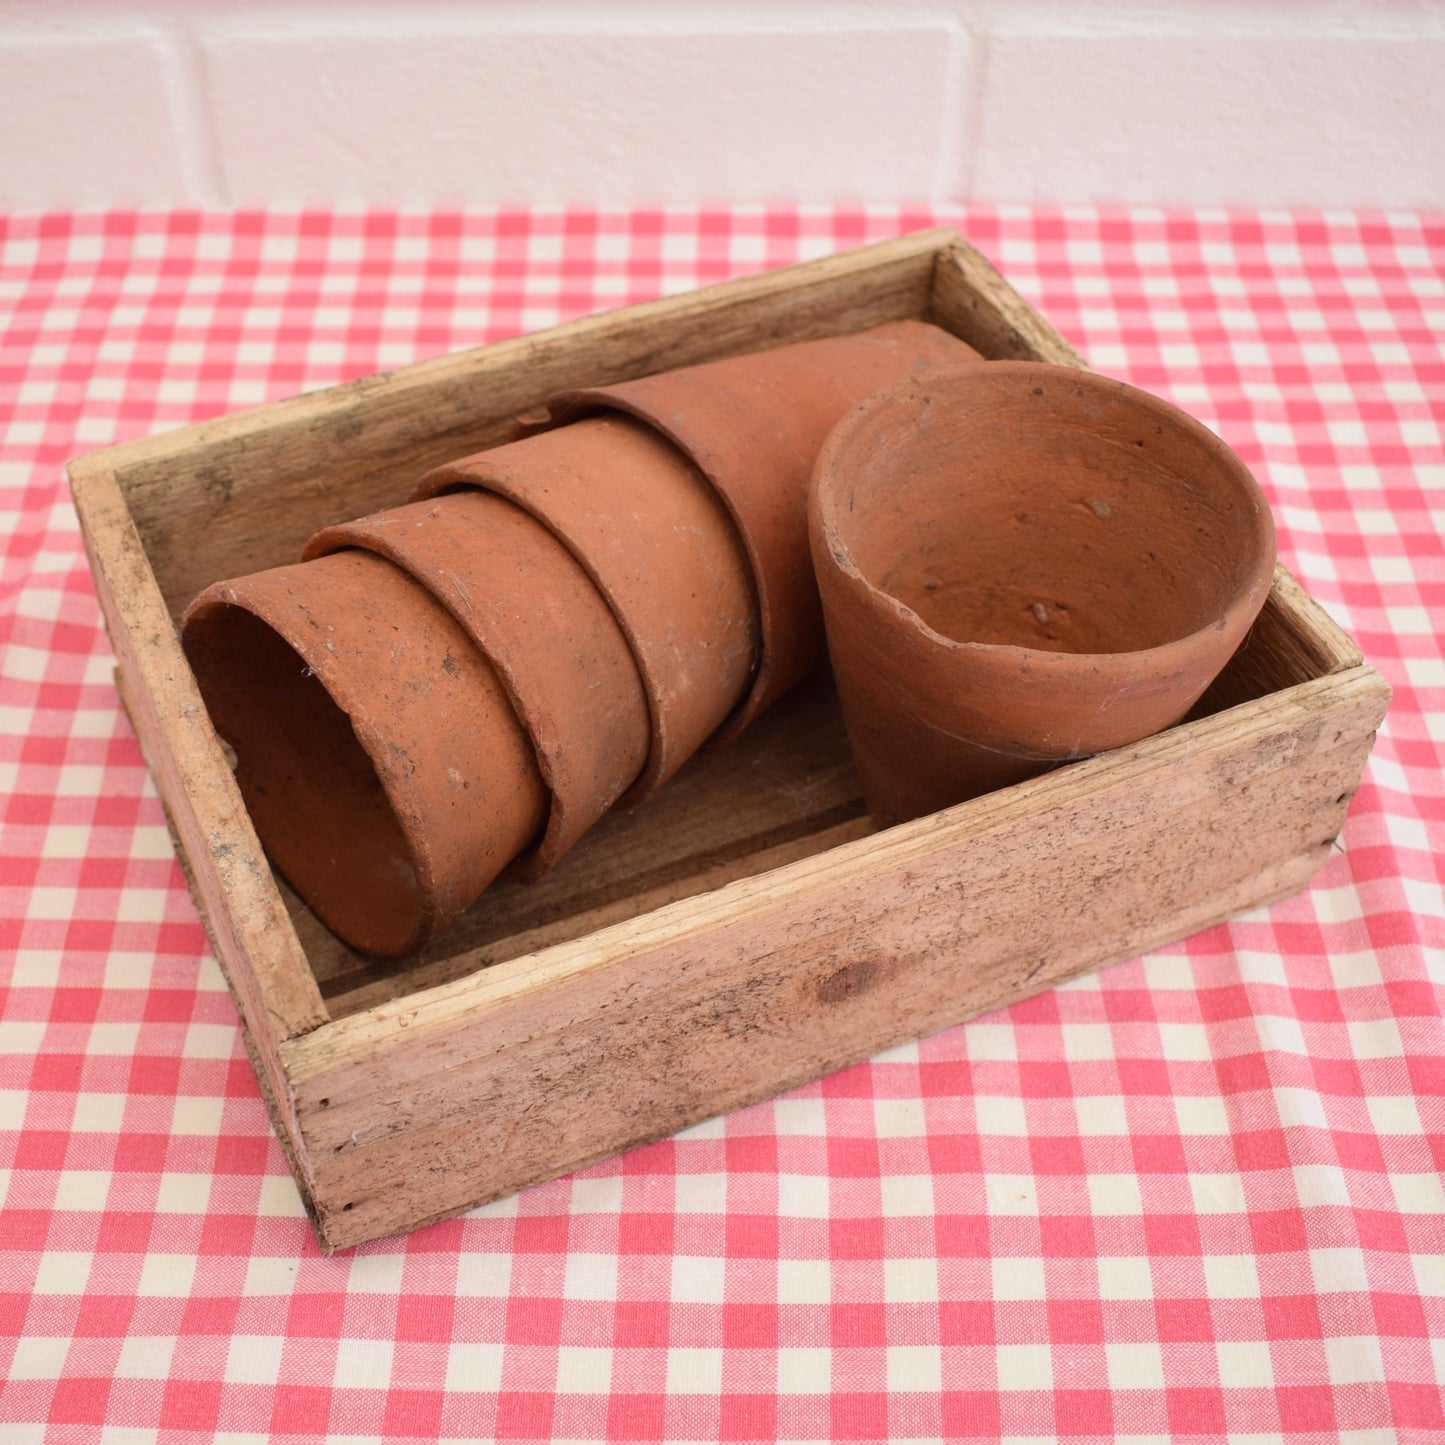 Vintage Small Terracotta Pots In Wooden Seed Tray